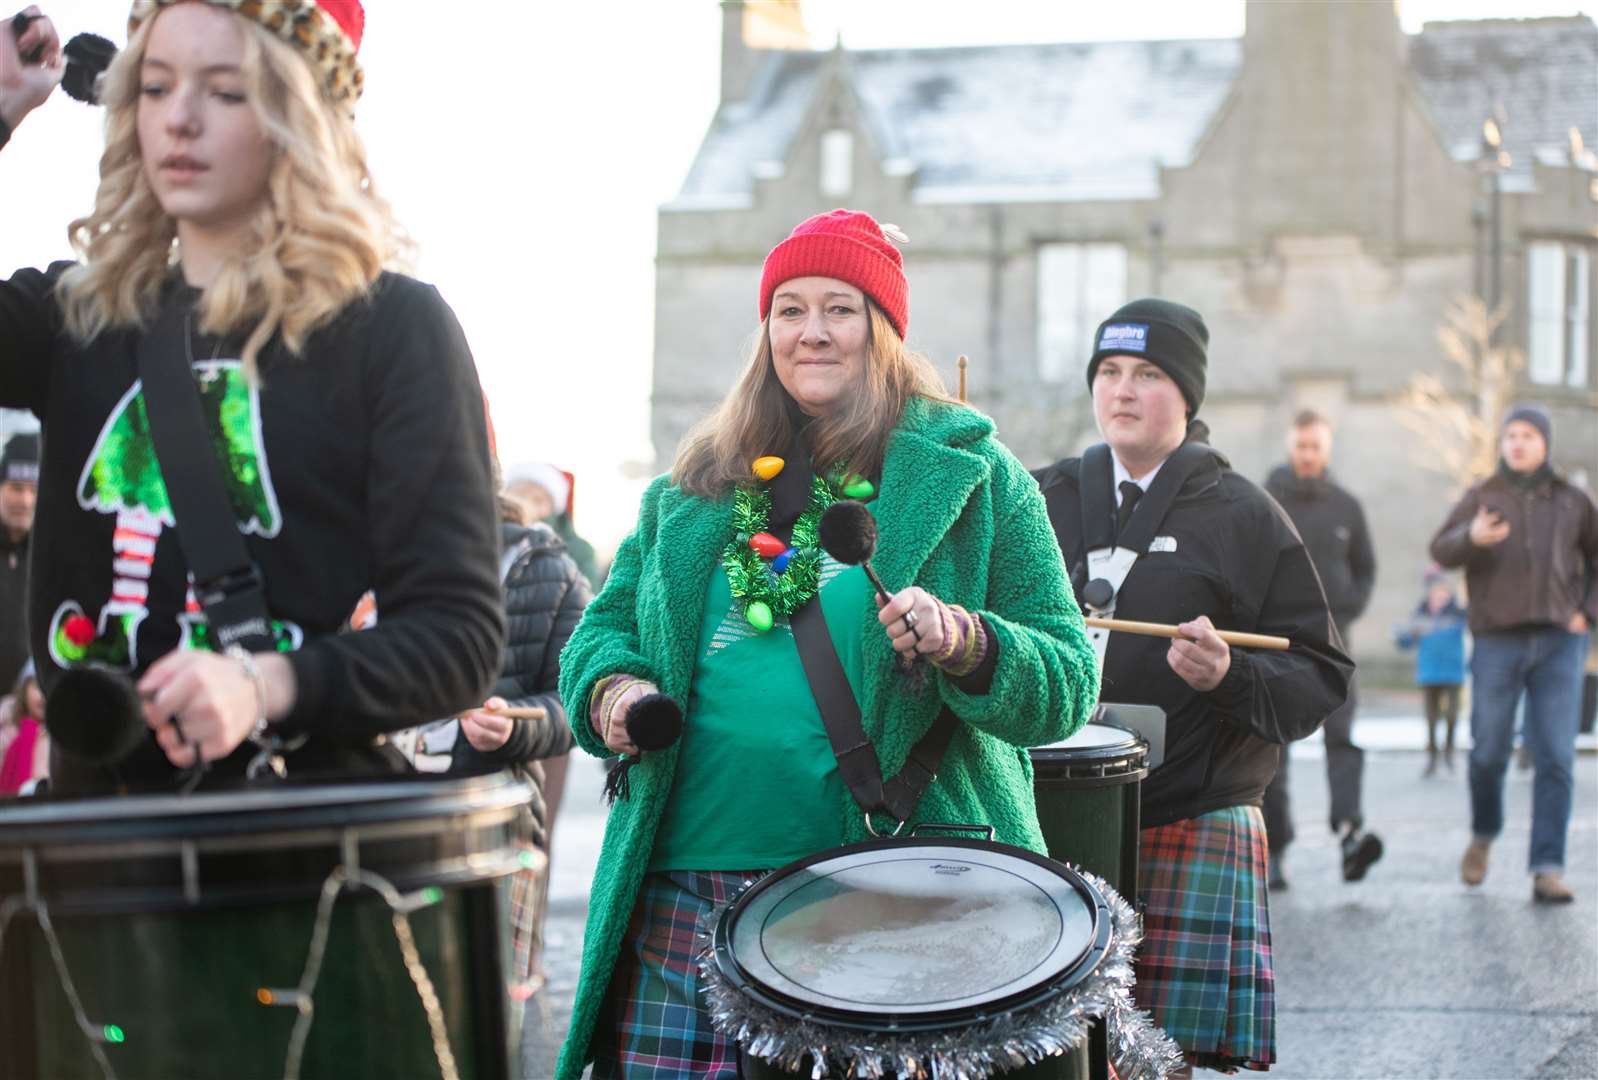 A festive looking Strathisla Pipe Band joined the parade. Picture: Daniel Forsyth